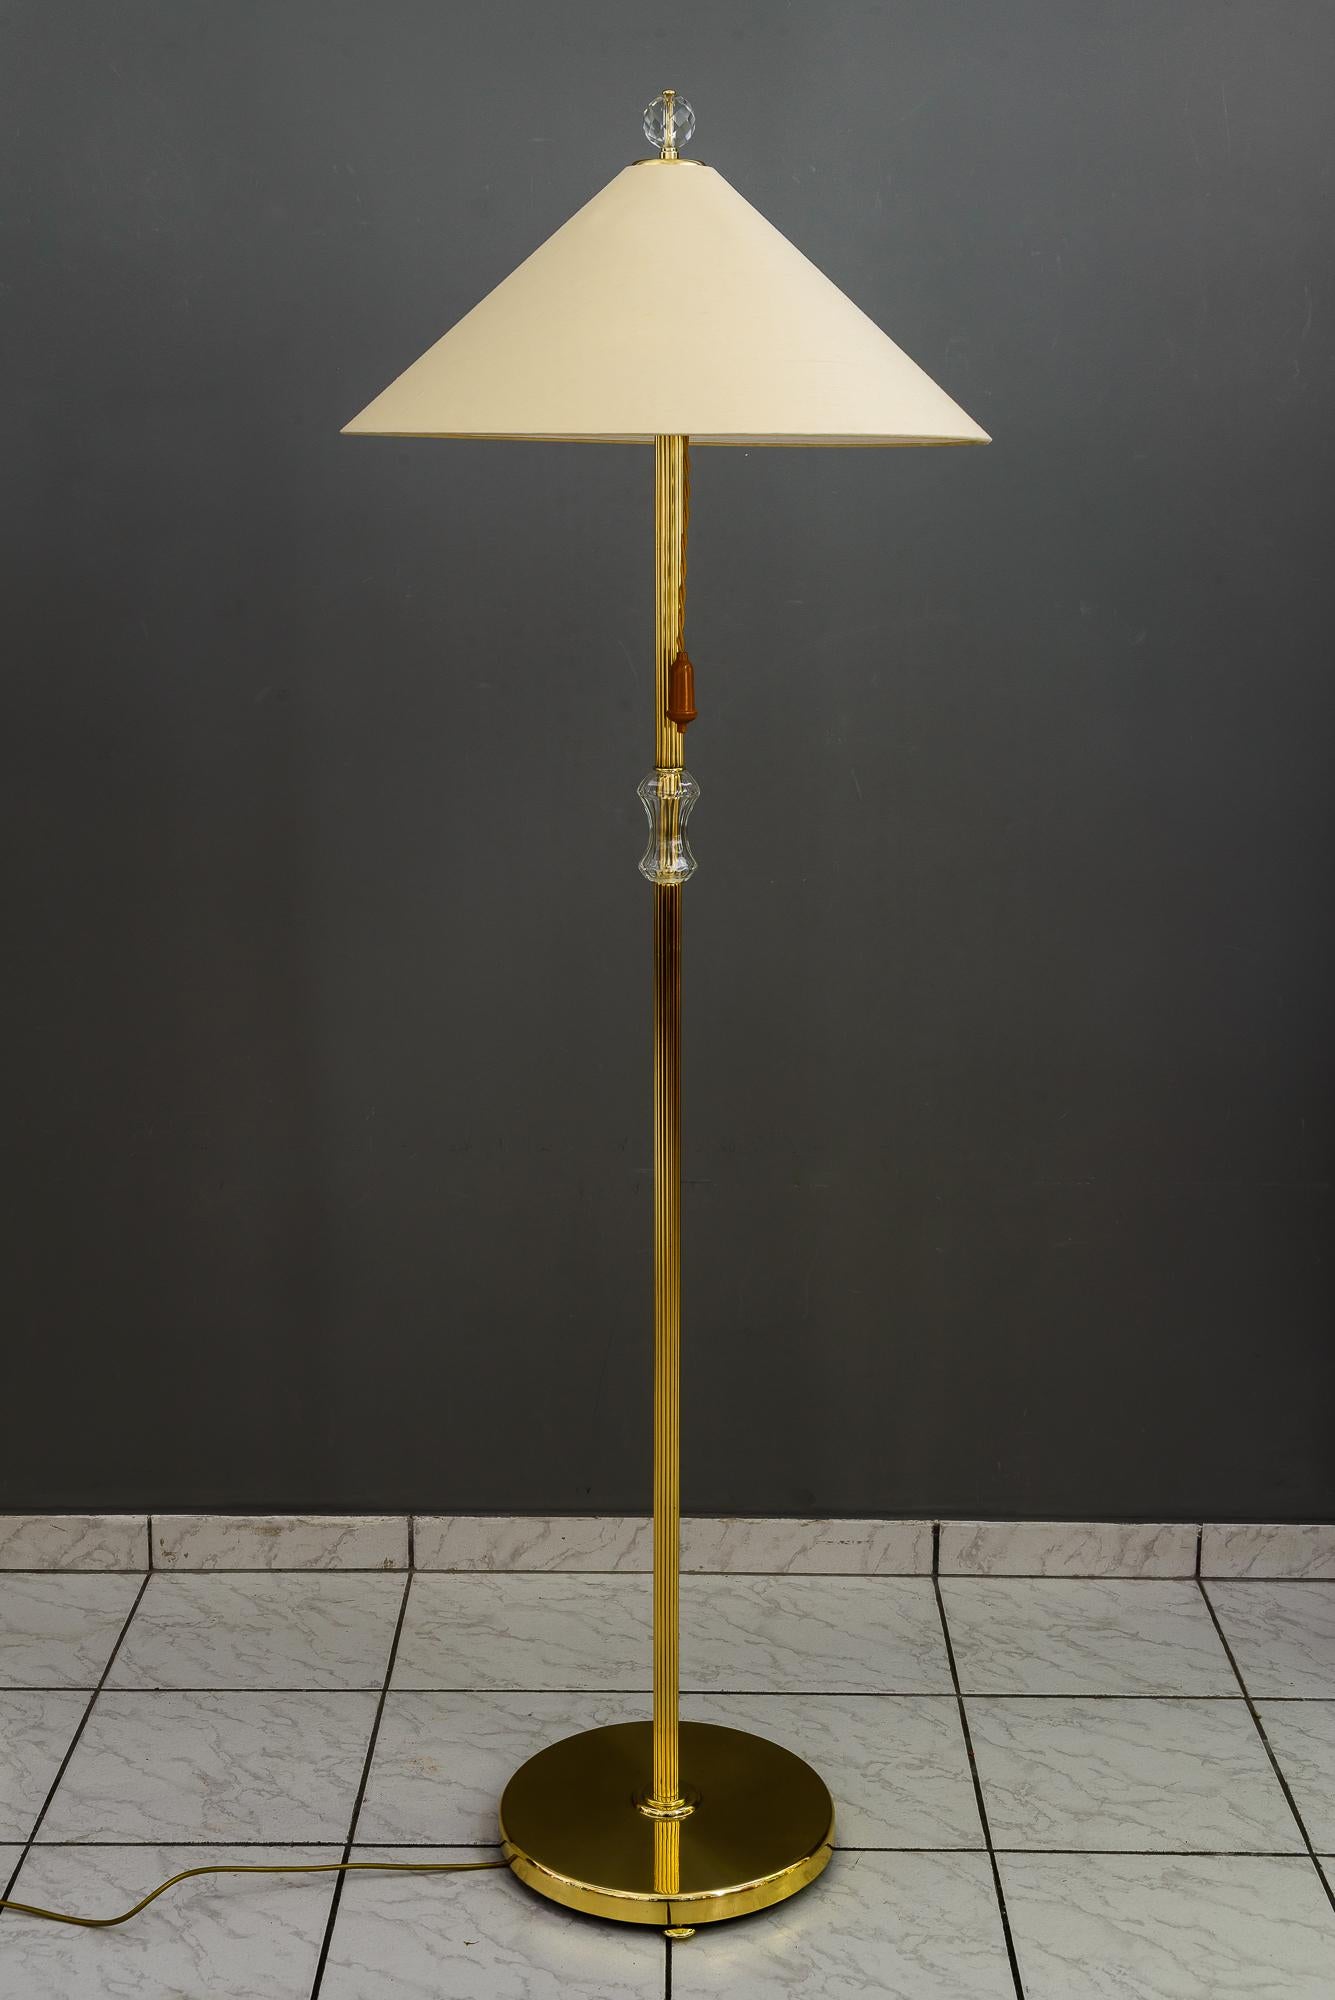 Floor lamp by Bakalowits vienna around 1950s
Brass polished and stove enameled
The fabric shade is replaced ( new )